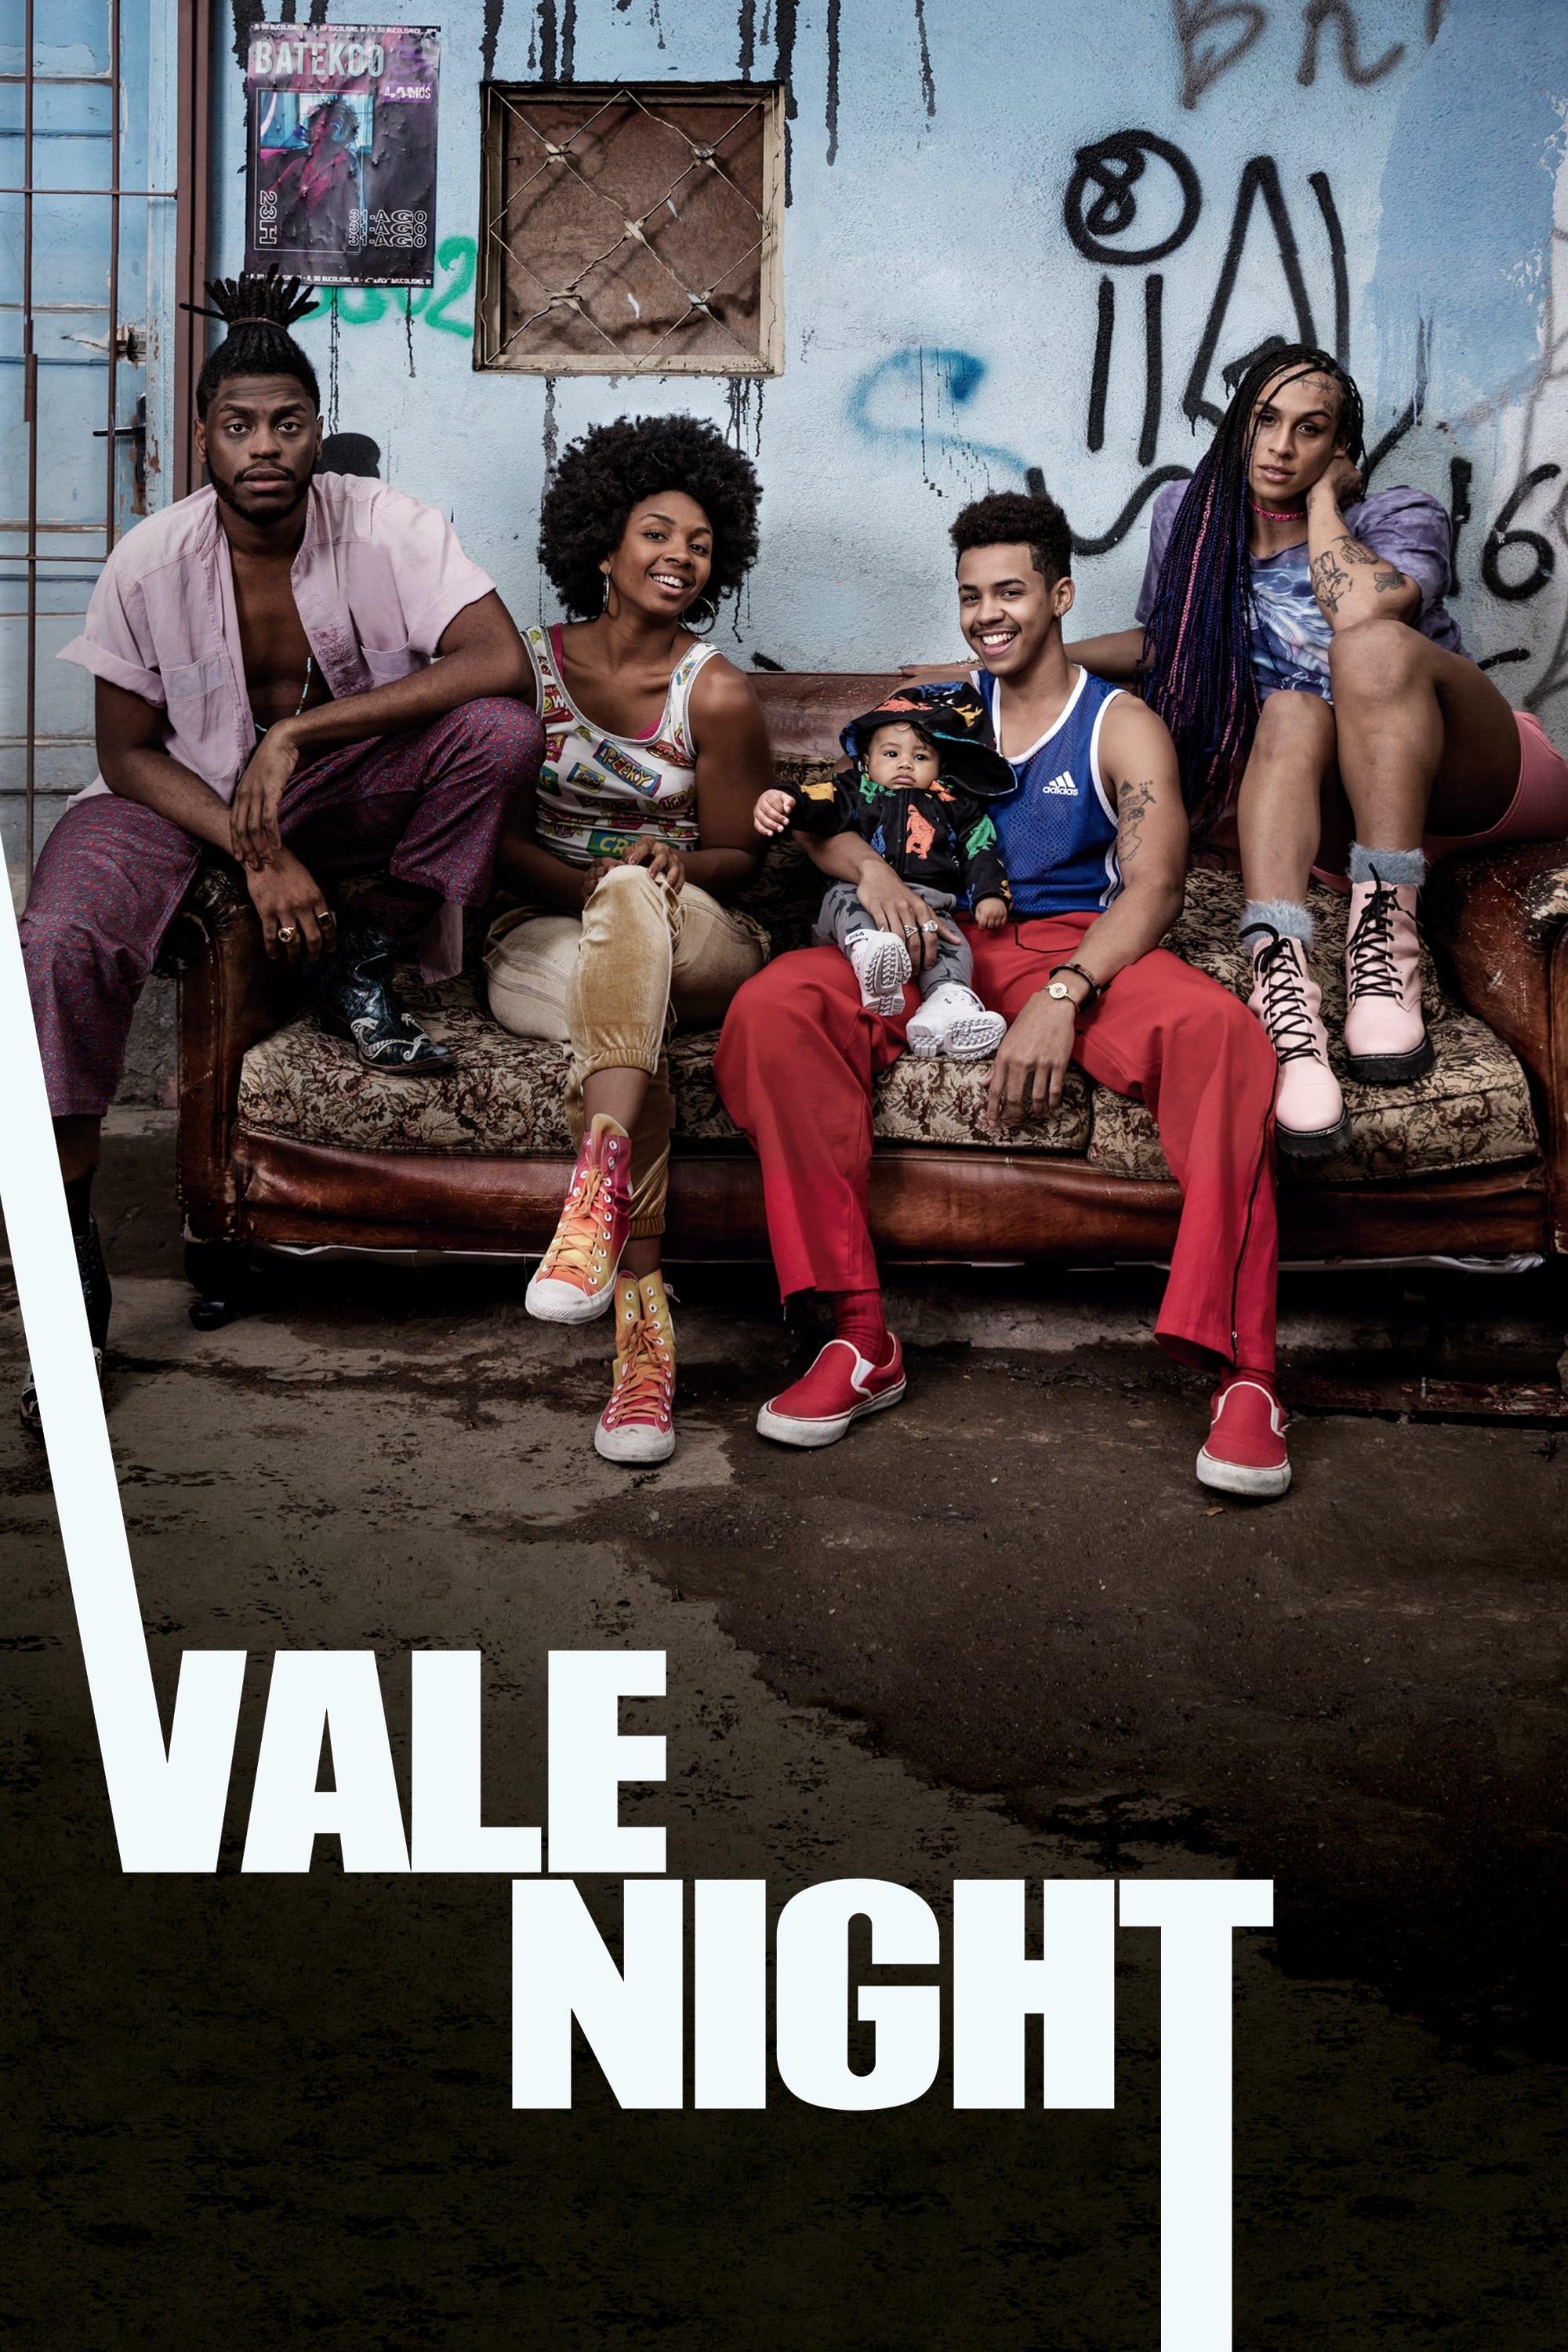 Vale Night poster